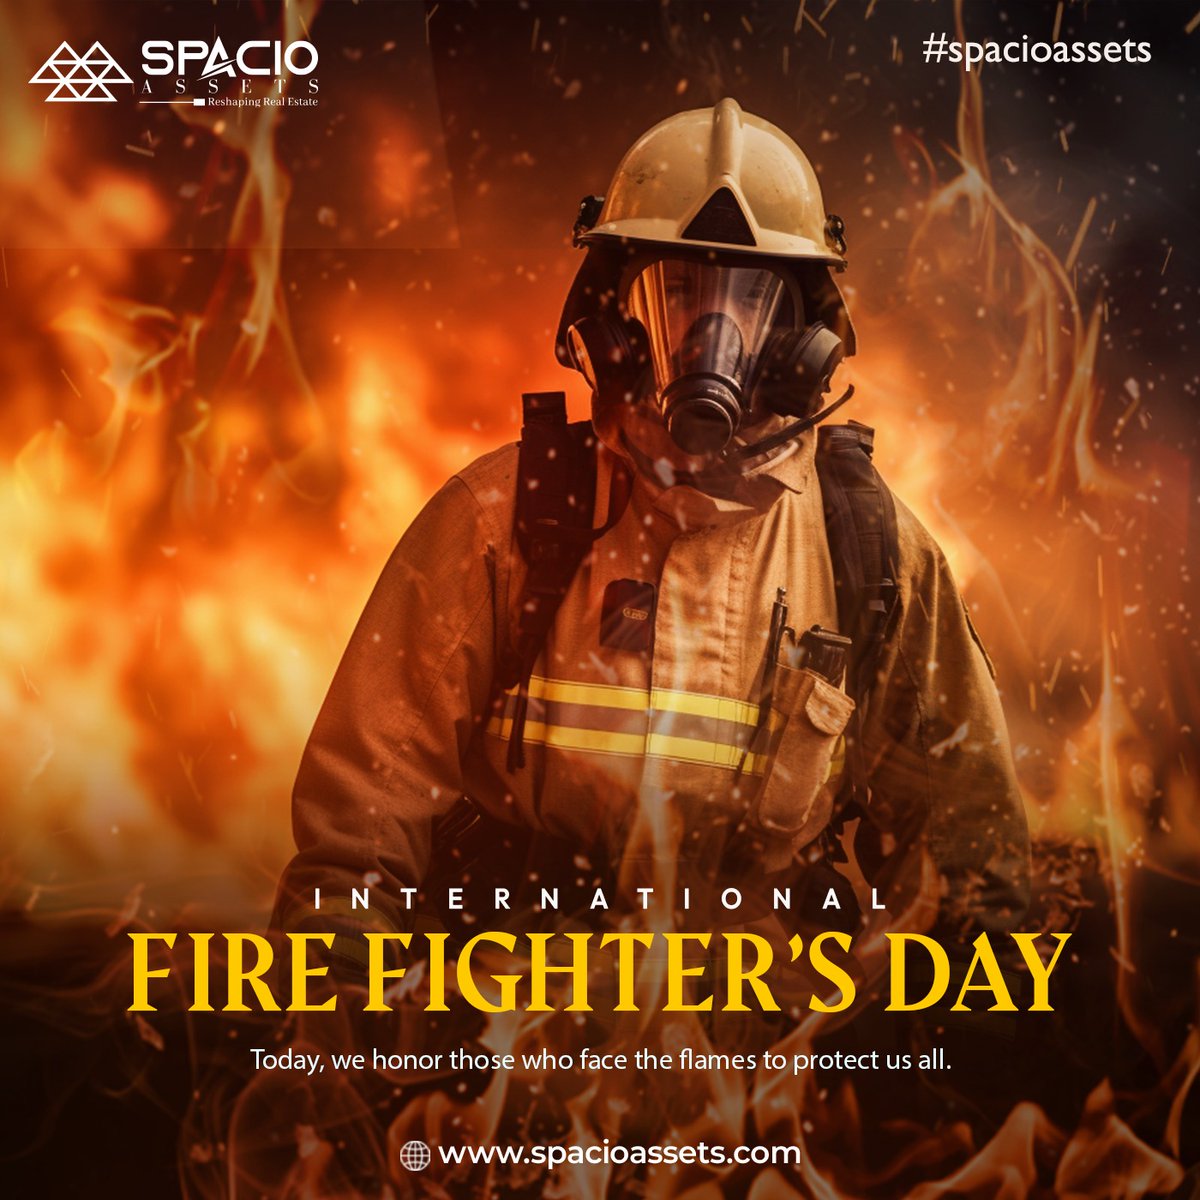 Raising awareness and appreciation for the fearless firefighters who keep our communities safe. 

#HeroesInAction #BraveryUnmatched #SaluteToFirefighters #FirefightersDay #SpacioAssets